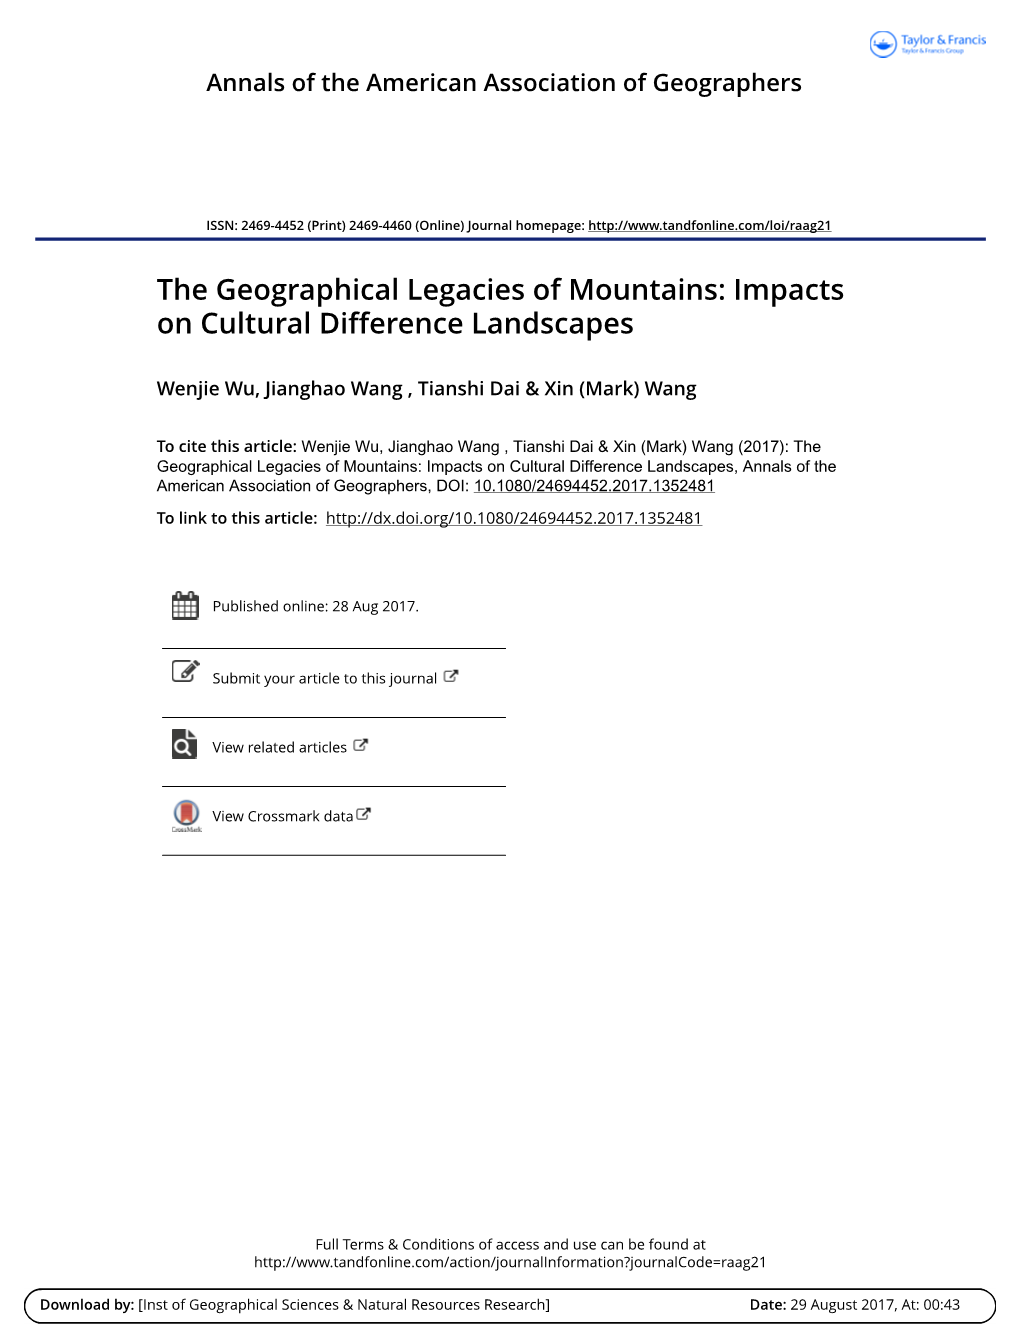 The Geographical Legacies of Mountains: Impacts on Cultural Difference Landscapes